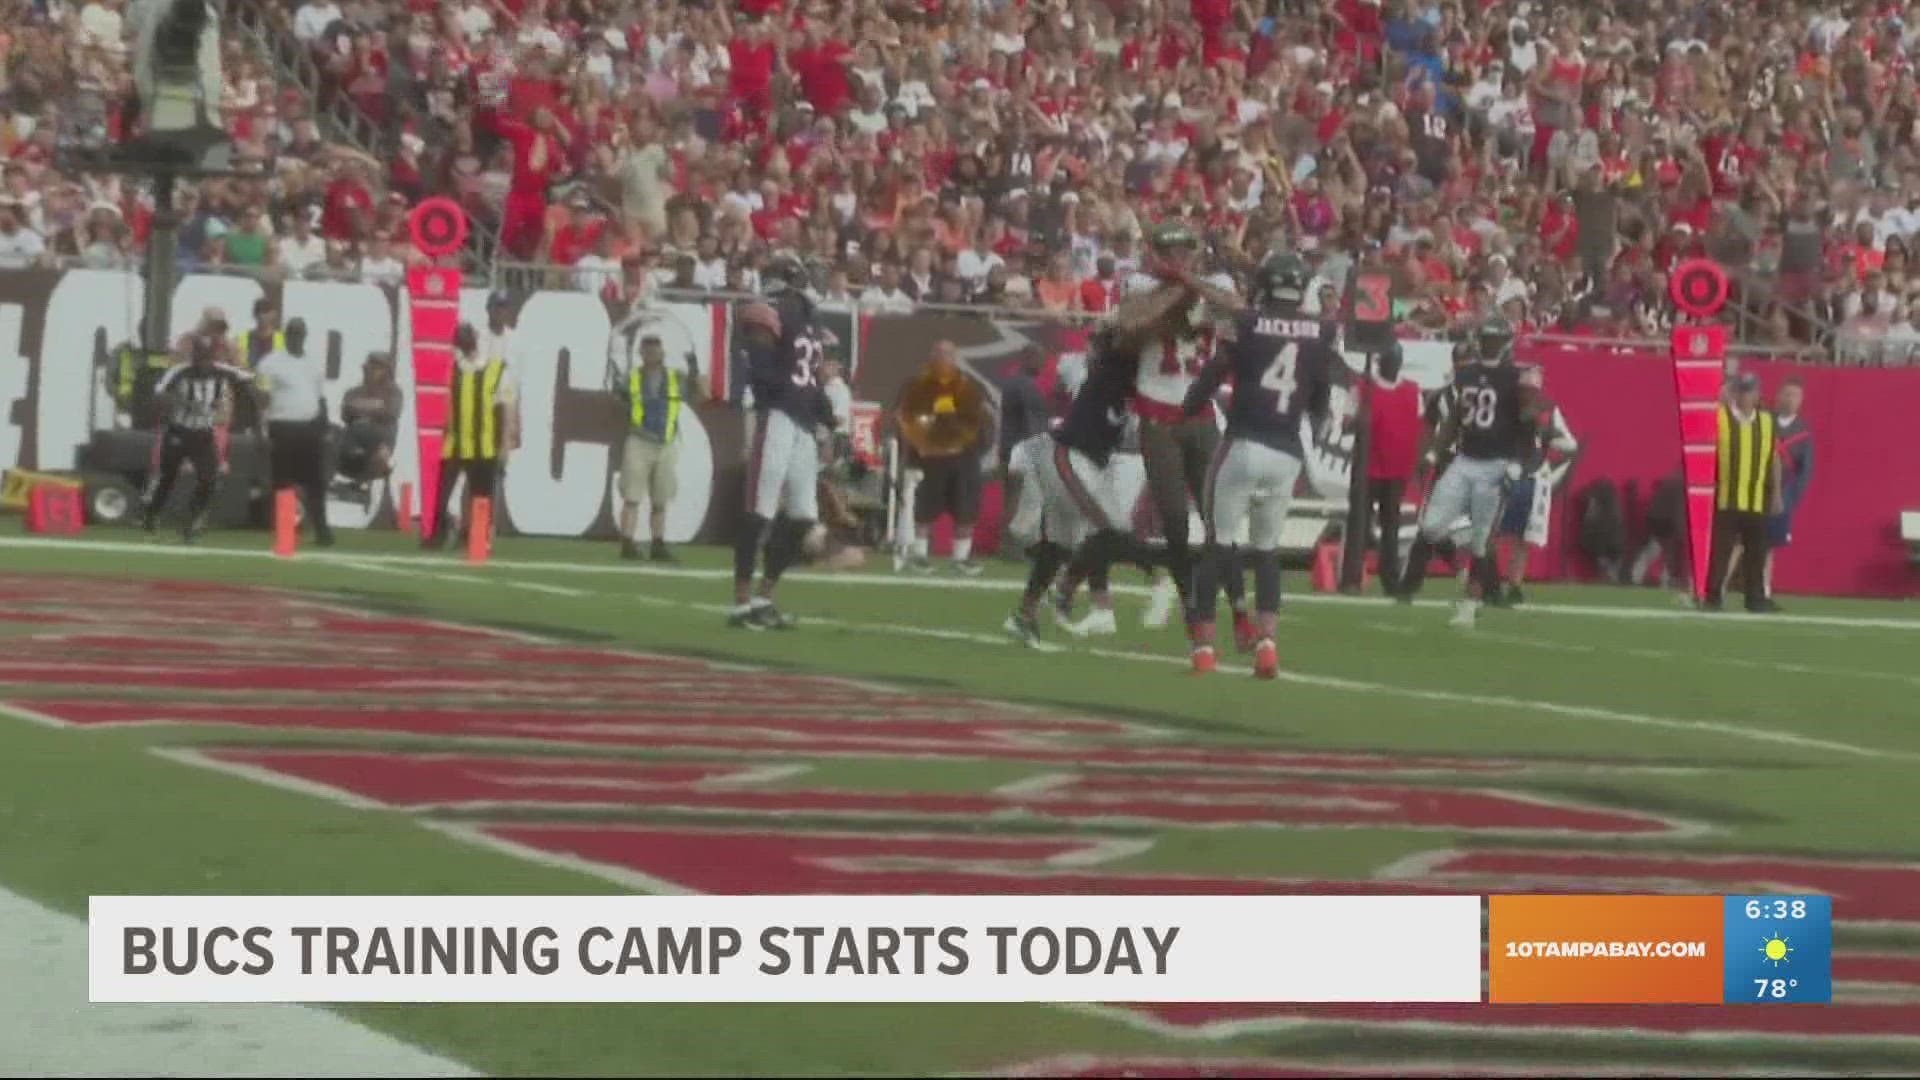 The Bucs are back. They are taking the field for training camp.